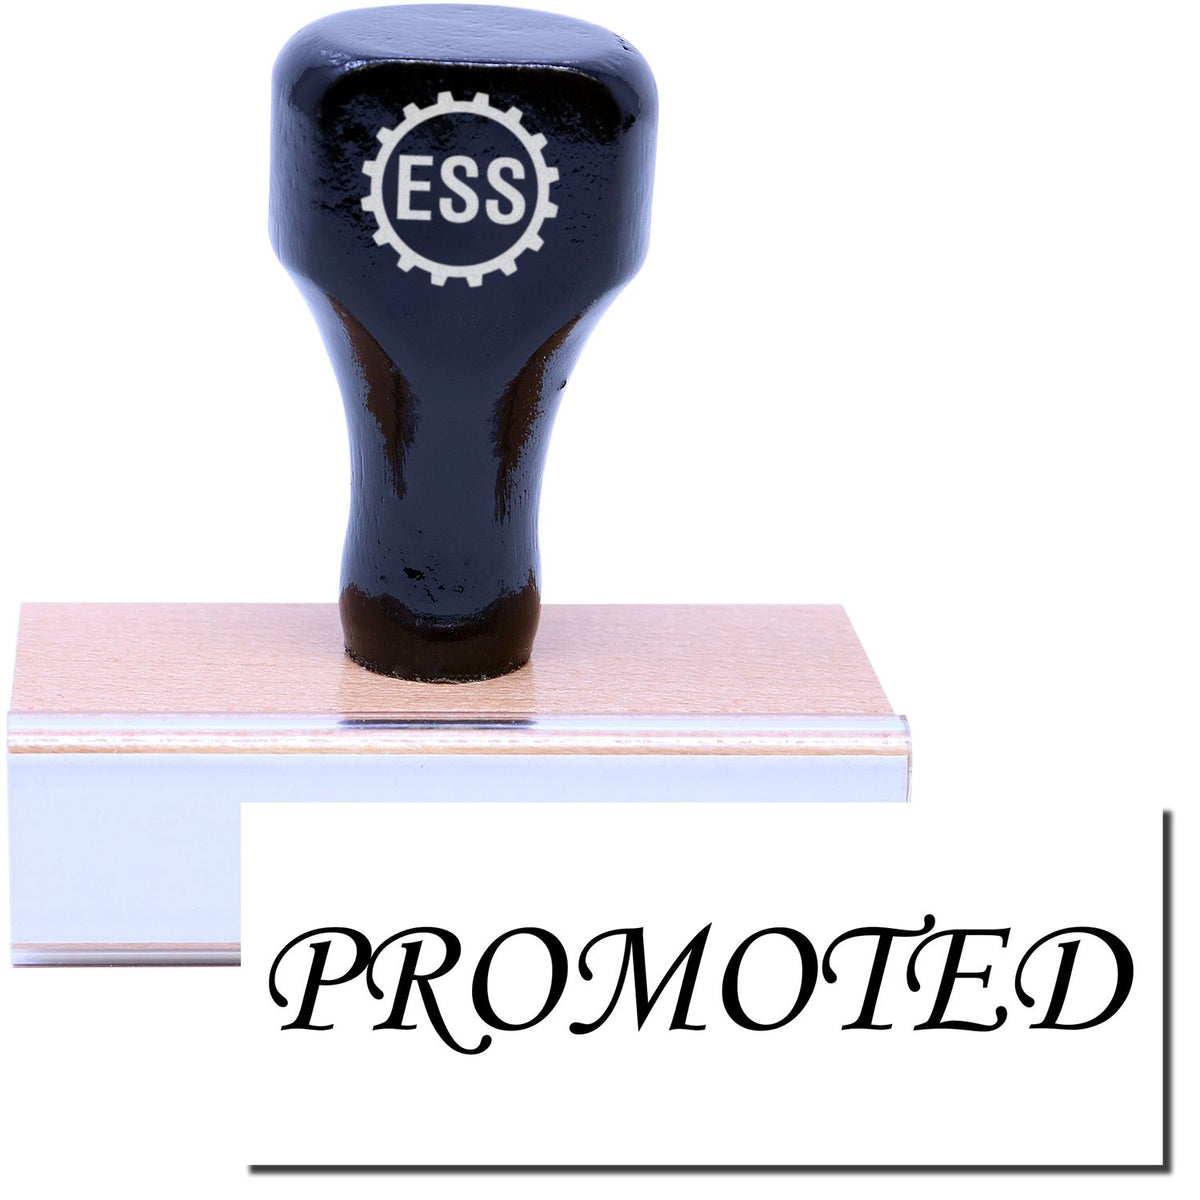 A stock office rubber stamp with a stamped image showing how the text &quot;PROMOTED&quot; in a large font is displayed after stamping.